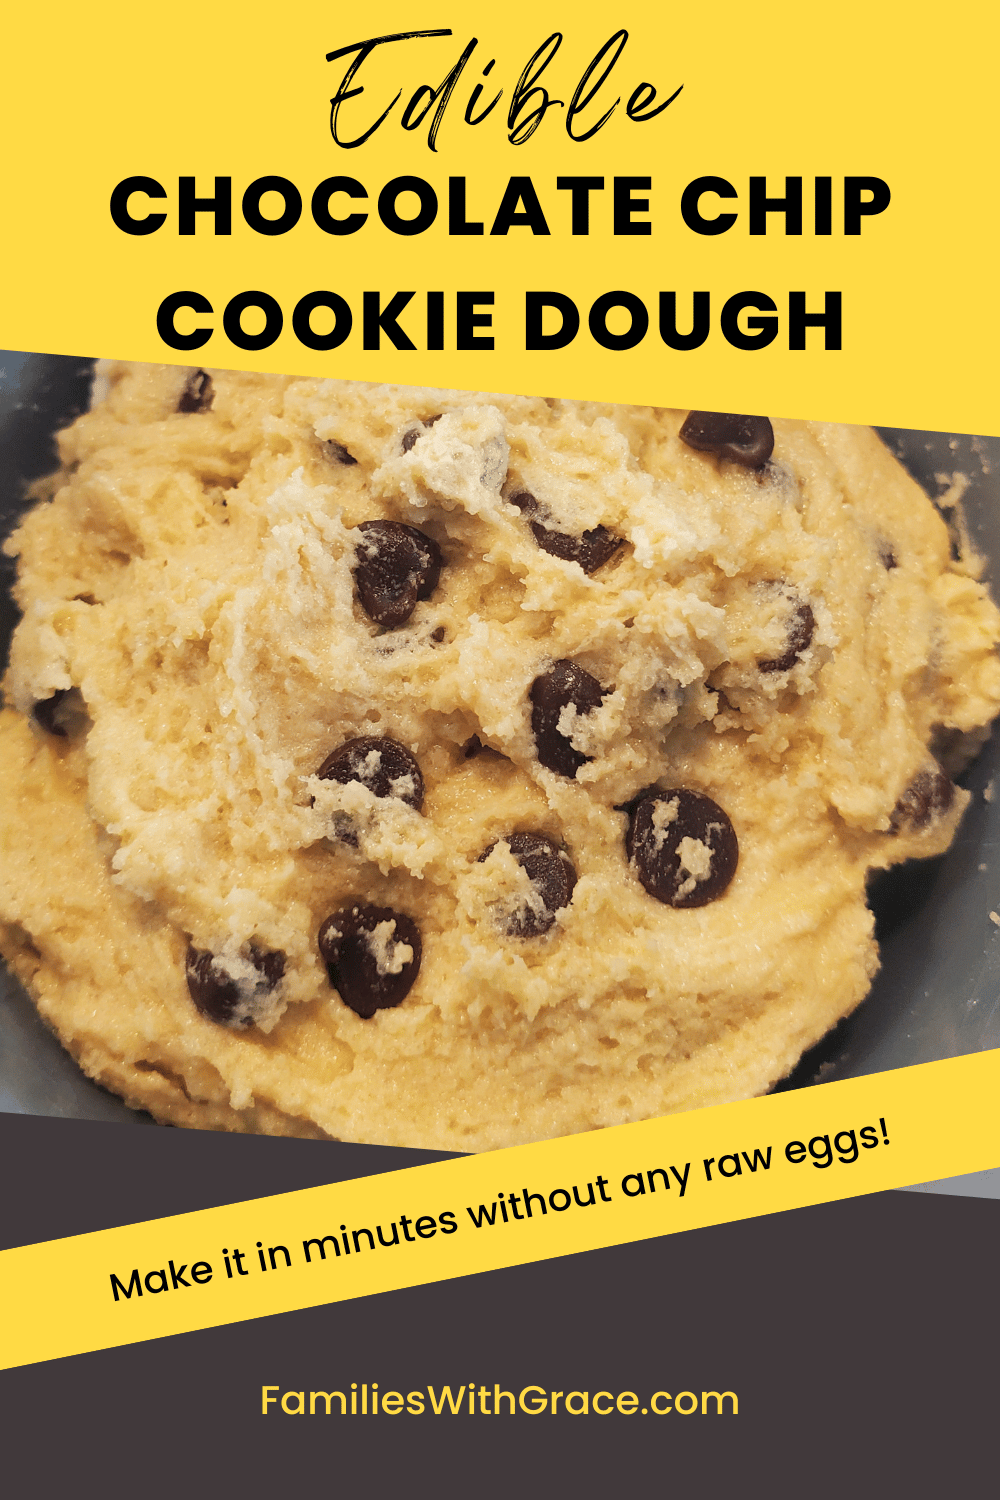 Edible chocolate chip cookie dough you can make in minutes!